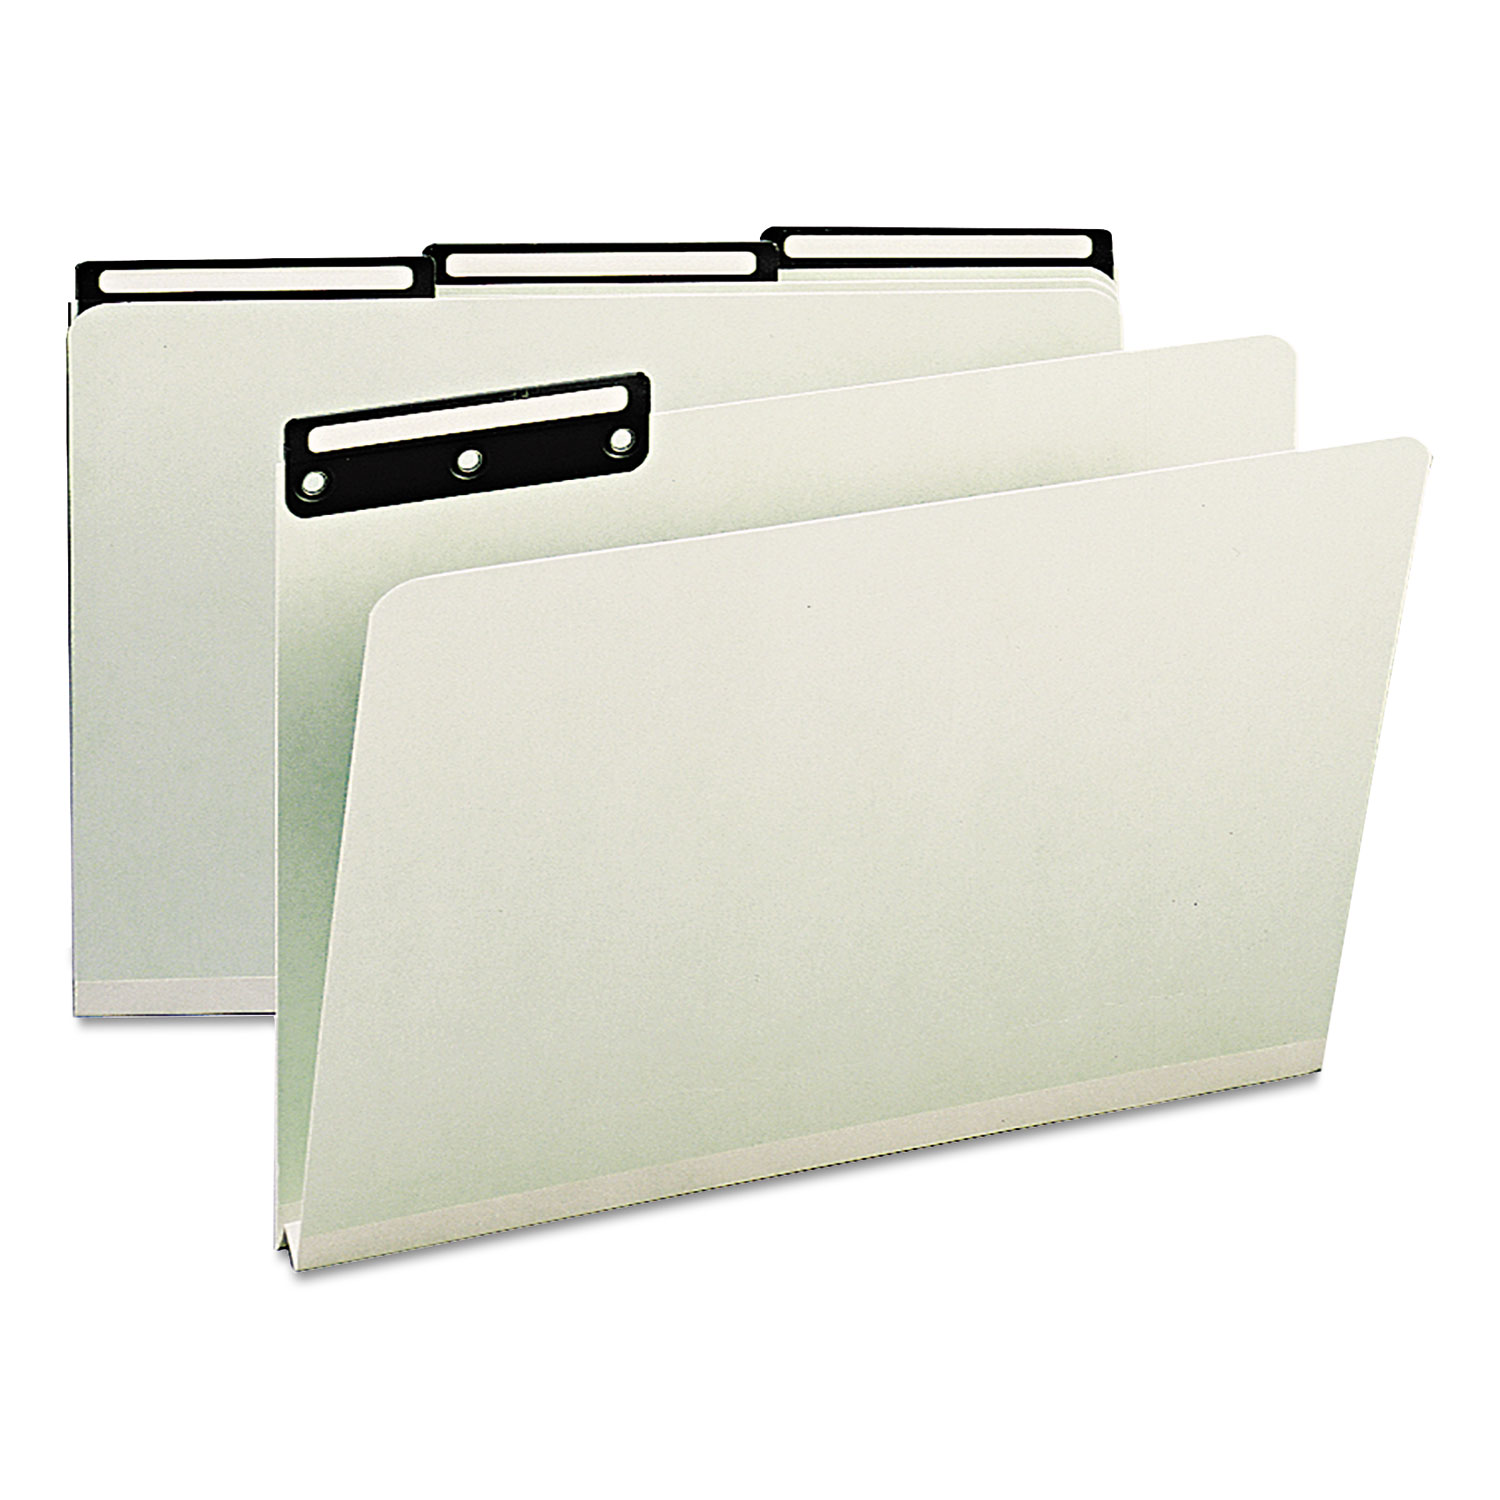  Smead 18430 Recycled Heavy Pressboard File Folders with Insertable Metal Tabs, 1/3-Cut Tabs, Legal Size, Gray-Green, 25/Box (SMD18430) 